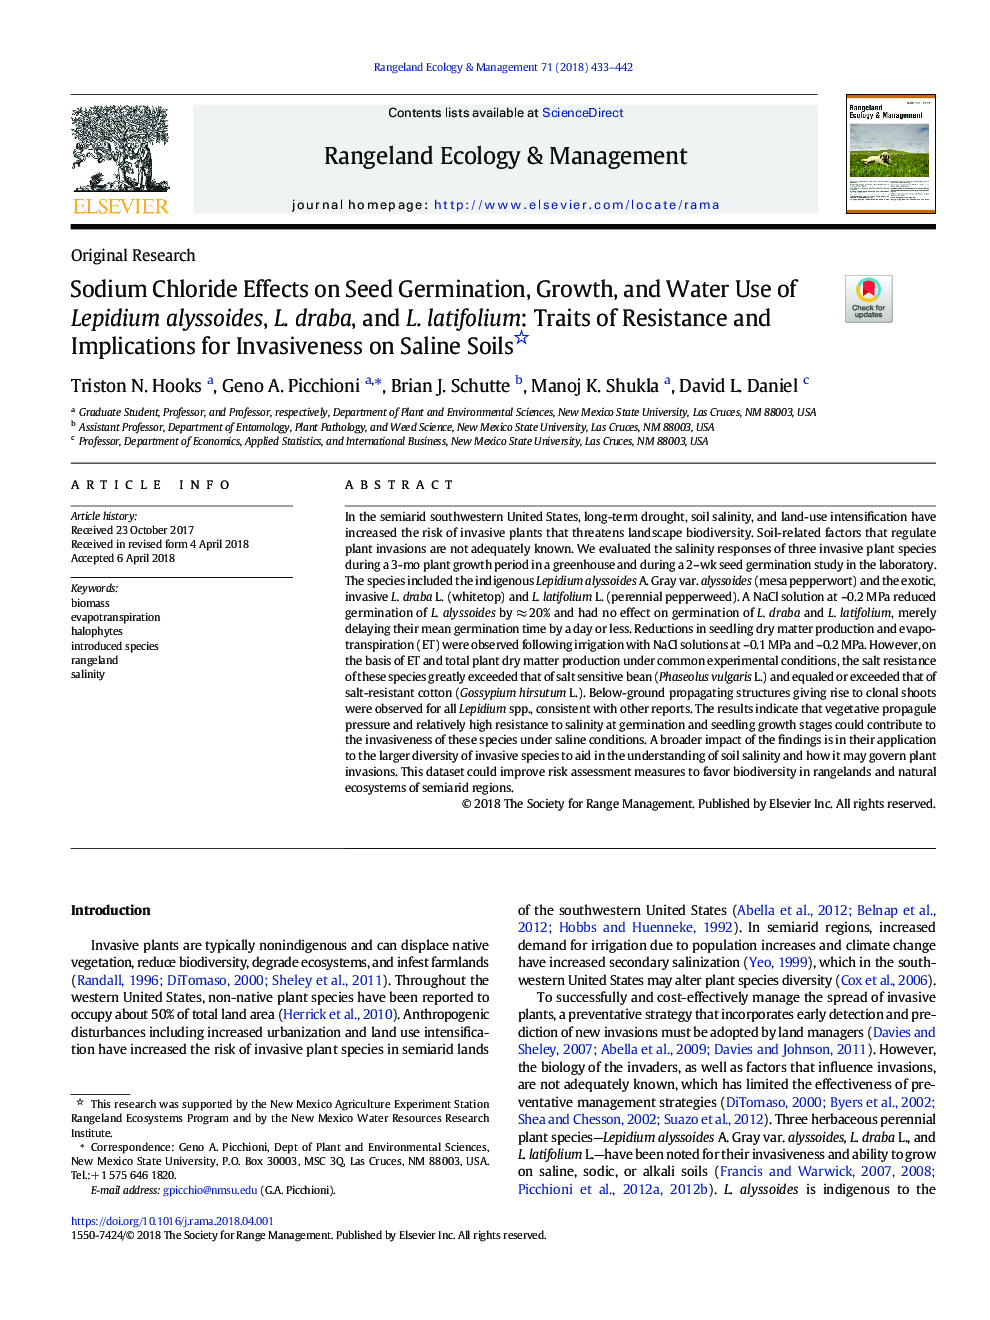 Sodium Chloride Effects on Seed Germination, Growth, and Water Use of Lepidium alyssoides, L. draba, and L. latifolium: Traits of Resistance and Implications for Invasiveness on Saline Soils